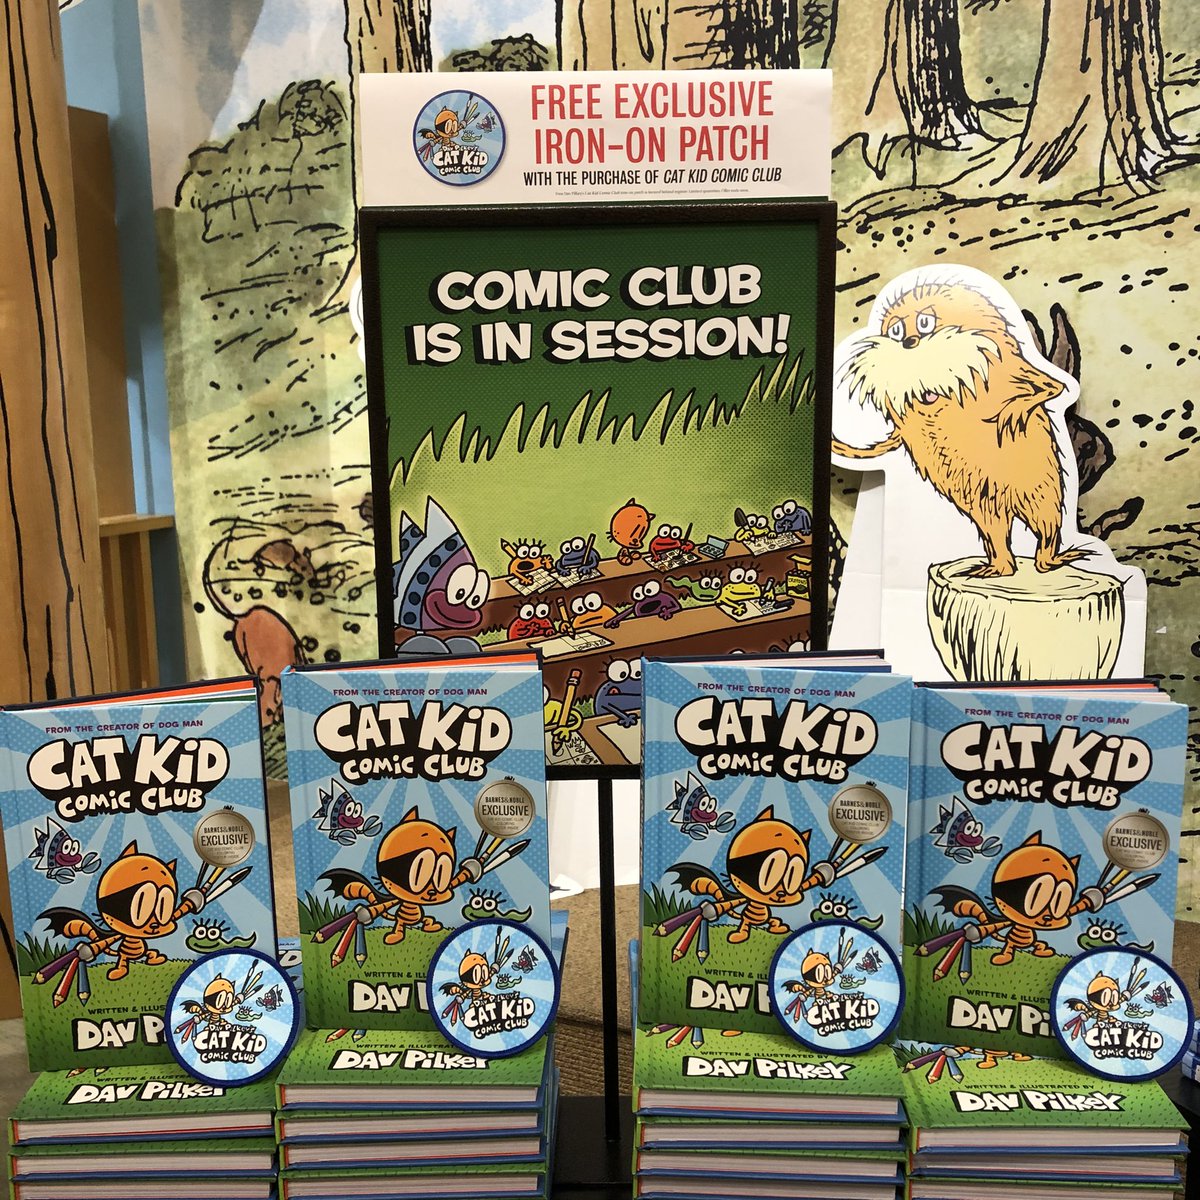 Barnes Noble Midland On Twitter The Creator Of Captain Underpants And Dog Man Is At It Again With His Newest Release Cat Kid Comic Club While Supplies Last You Can Get